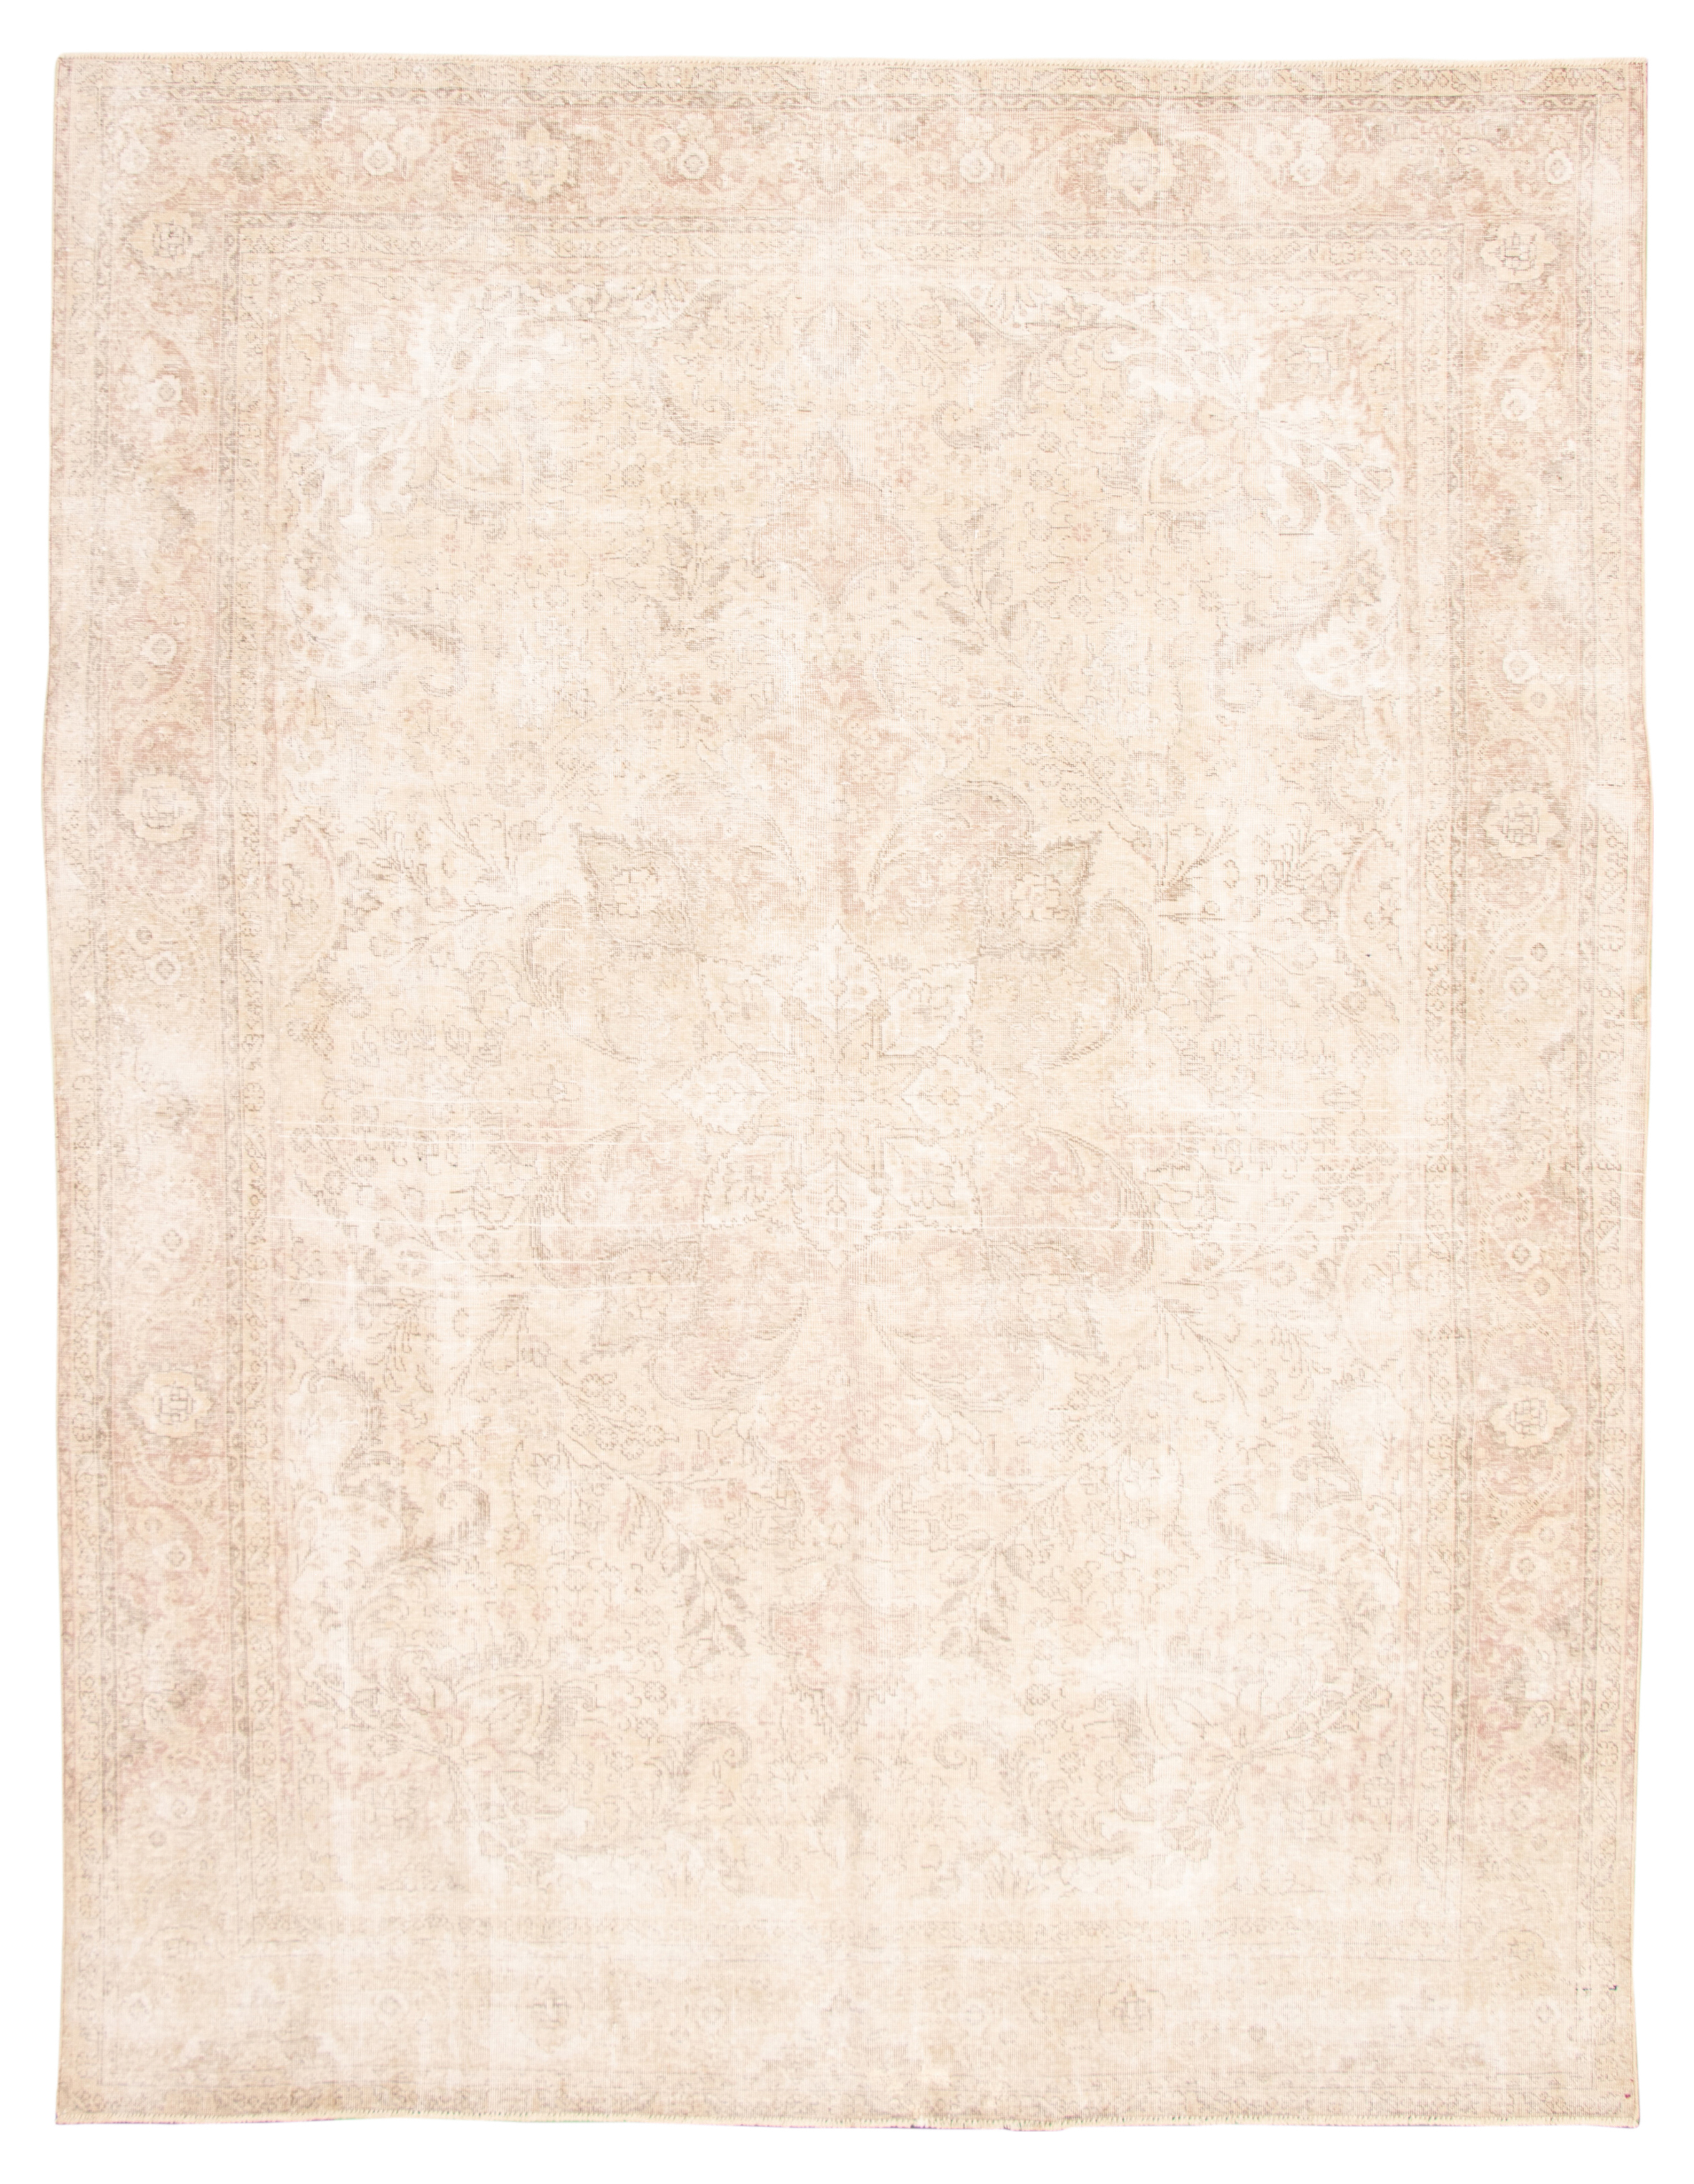 Hand-knotted Antalya Vintage Ivory Wool Rug 9'5" x 12'4" Size: 9'5" x 12'4"  